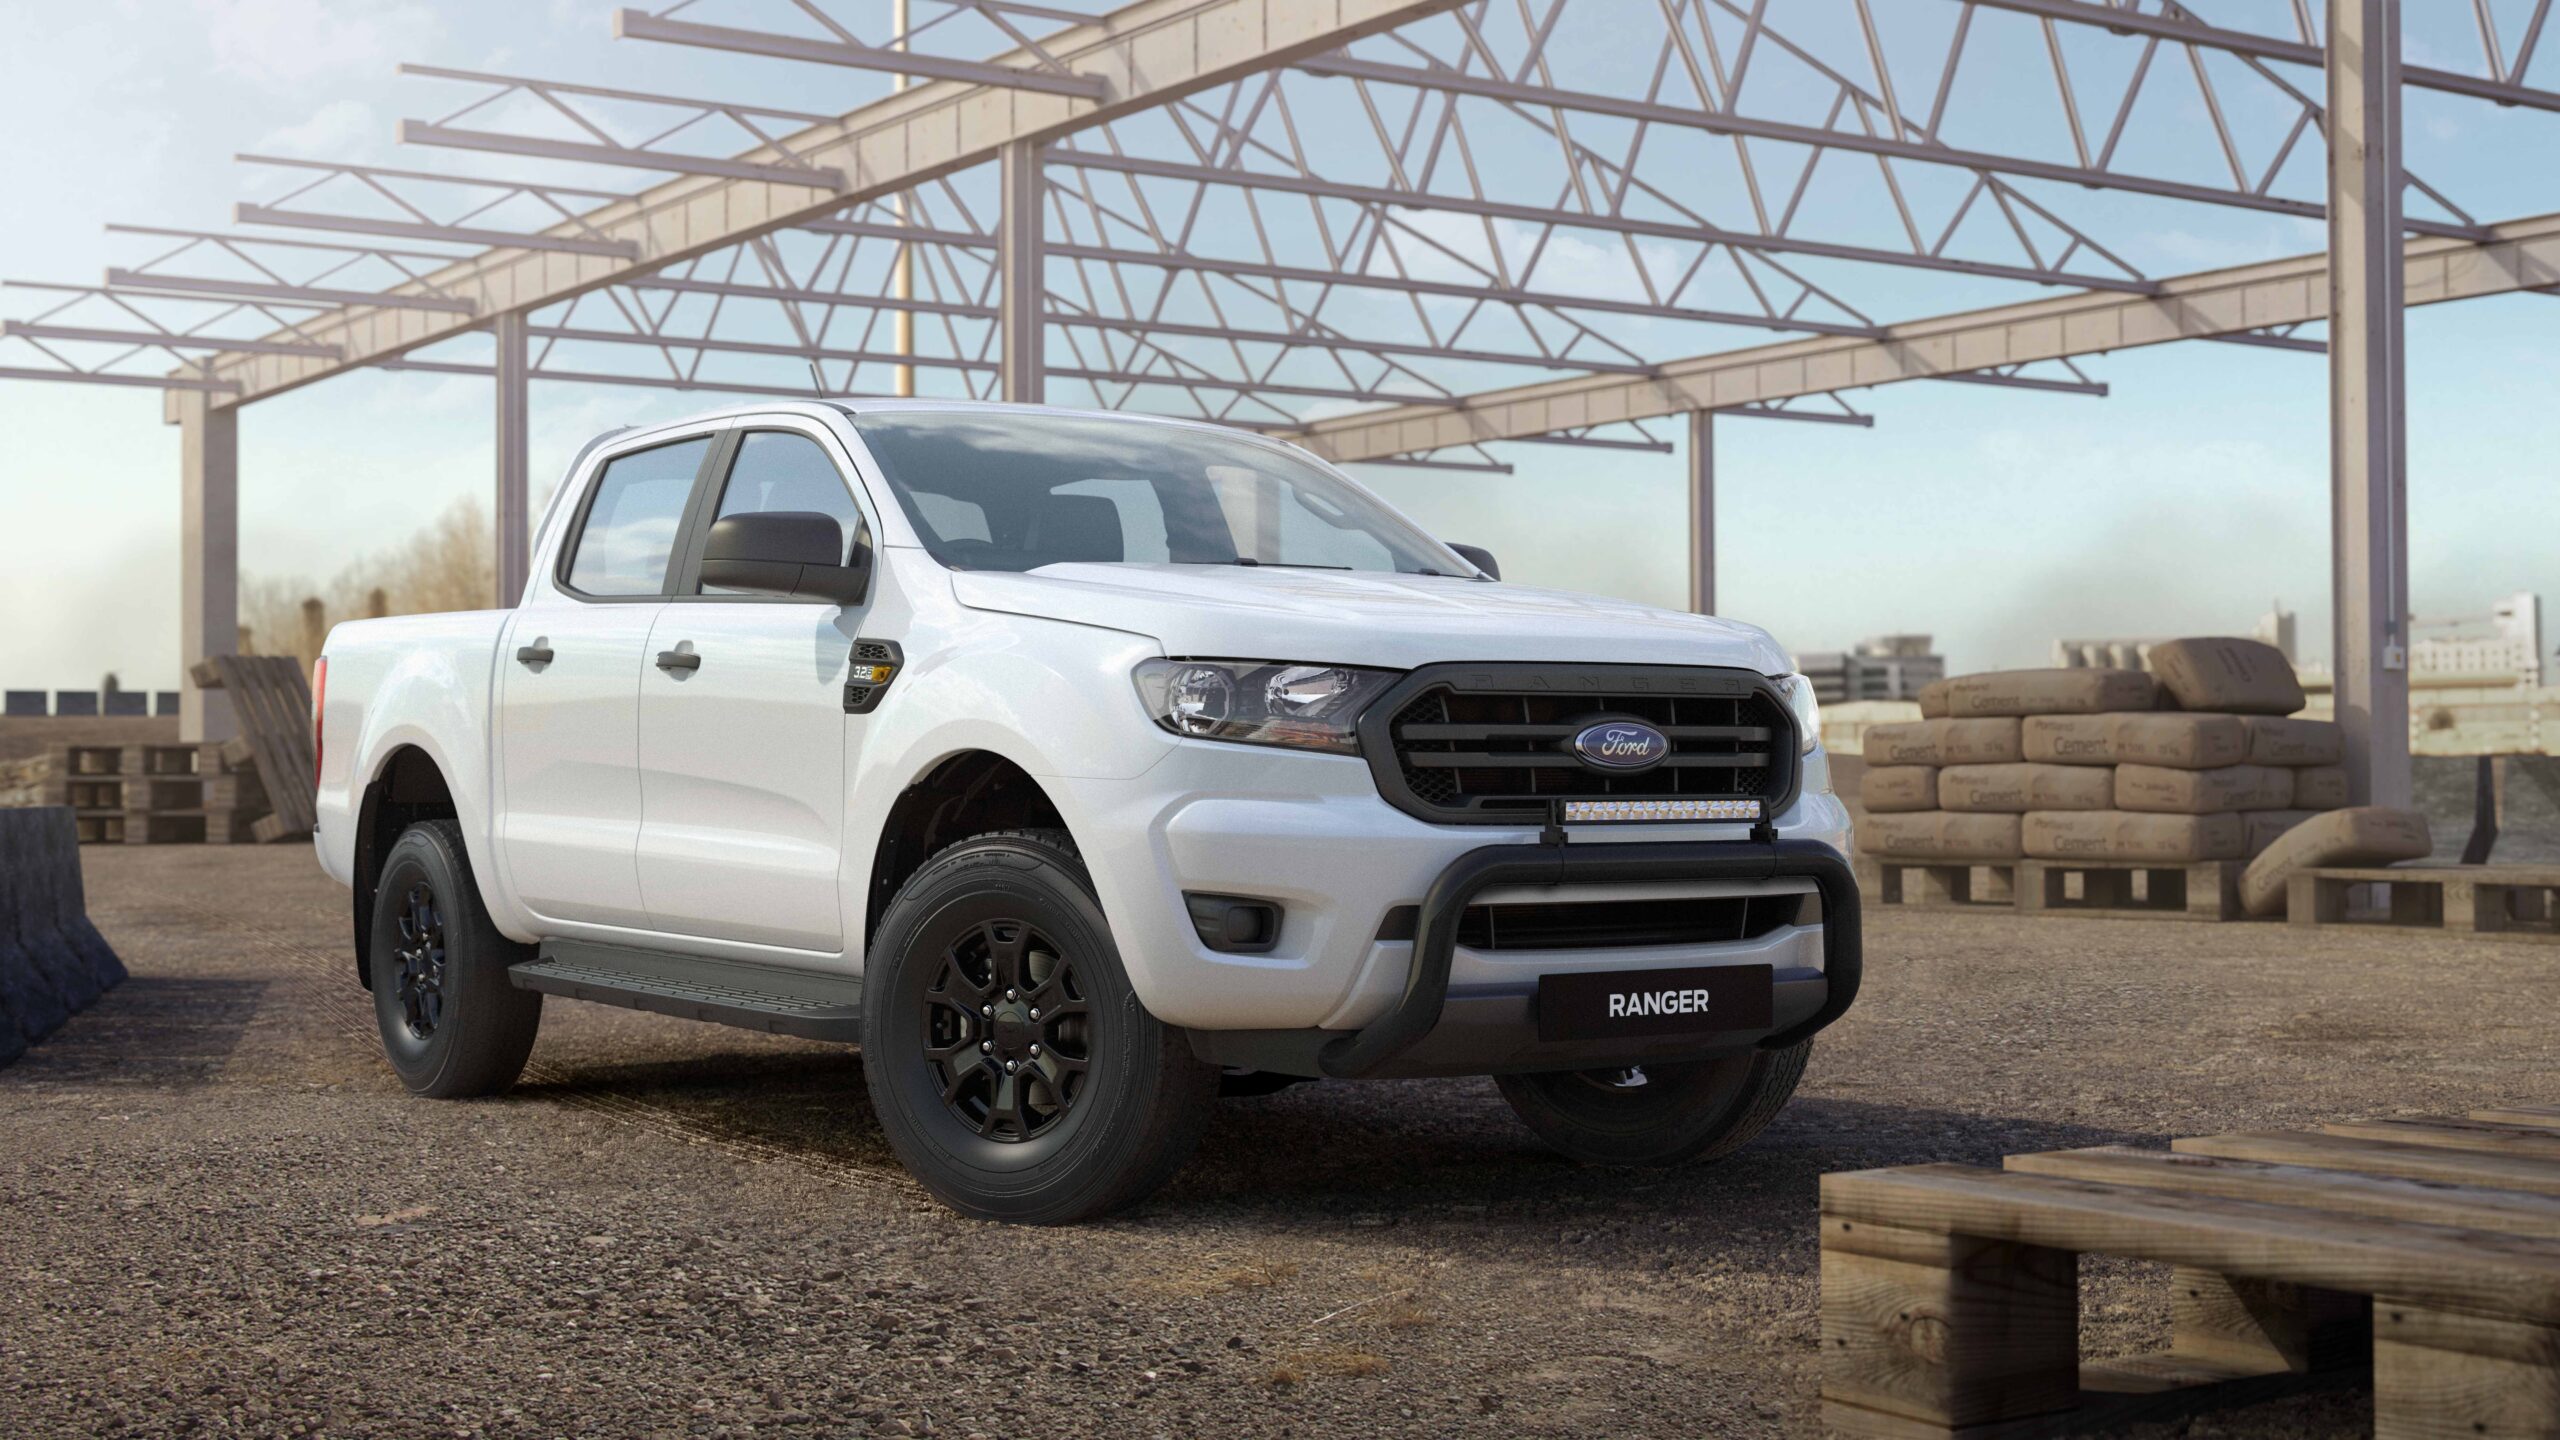 Ford Ranger Tradie – made for the workplace